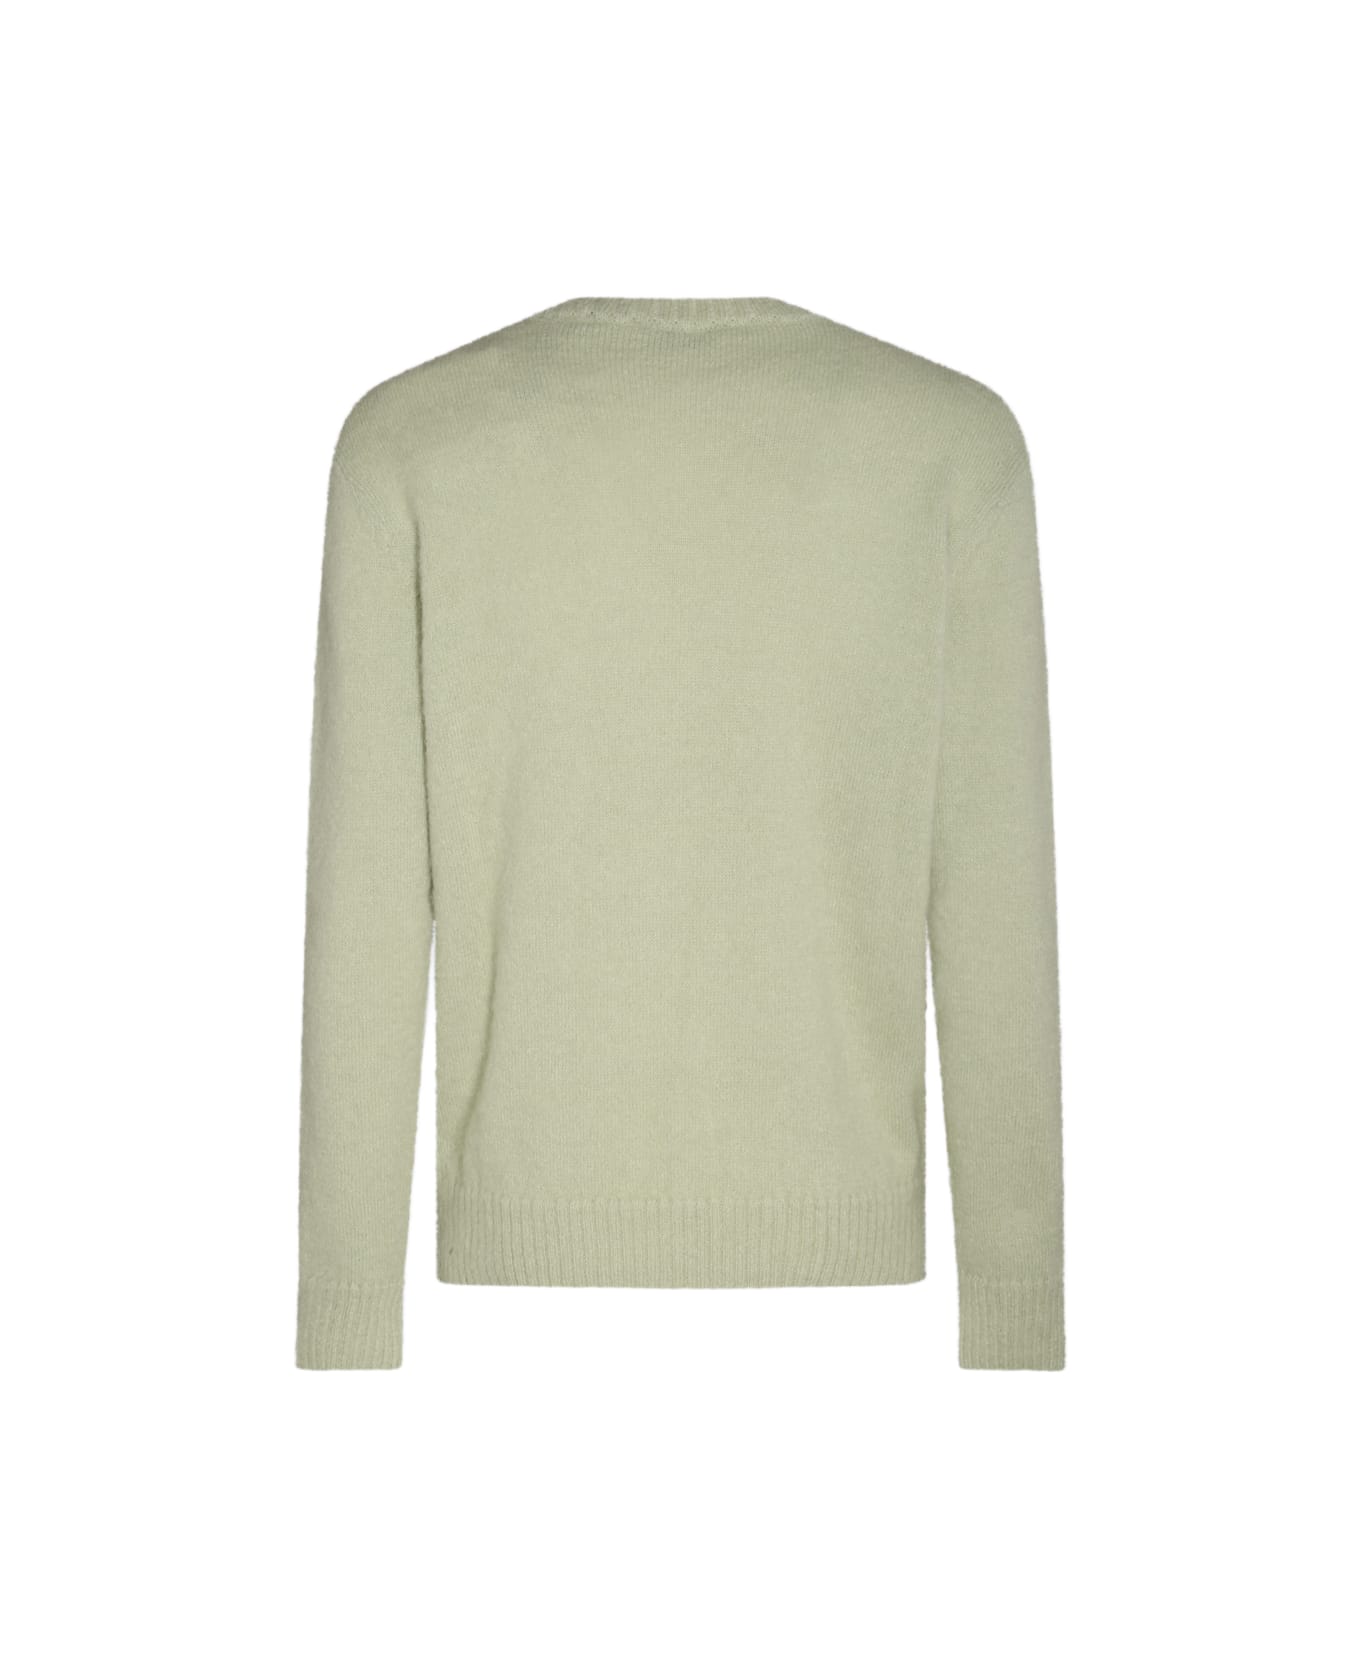 Lanvin Sage Wool And Mohair Blend Sweater - SAGE